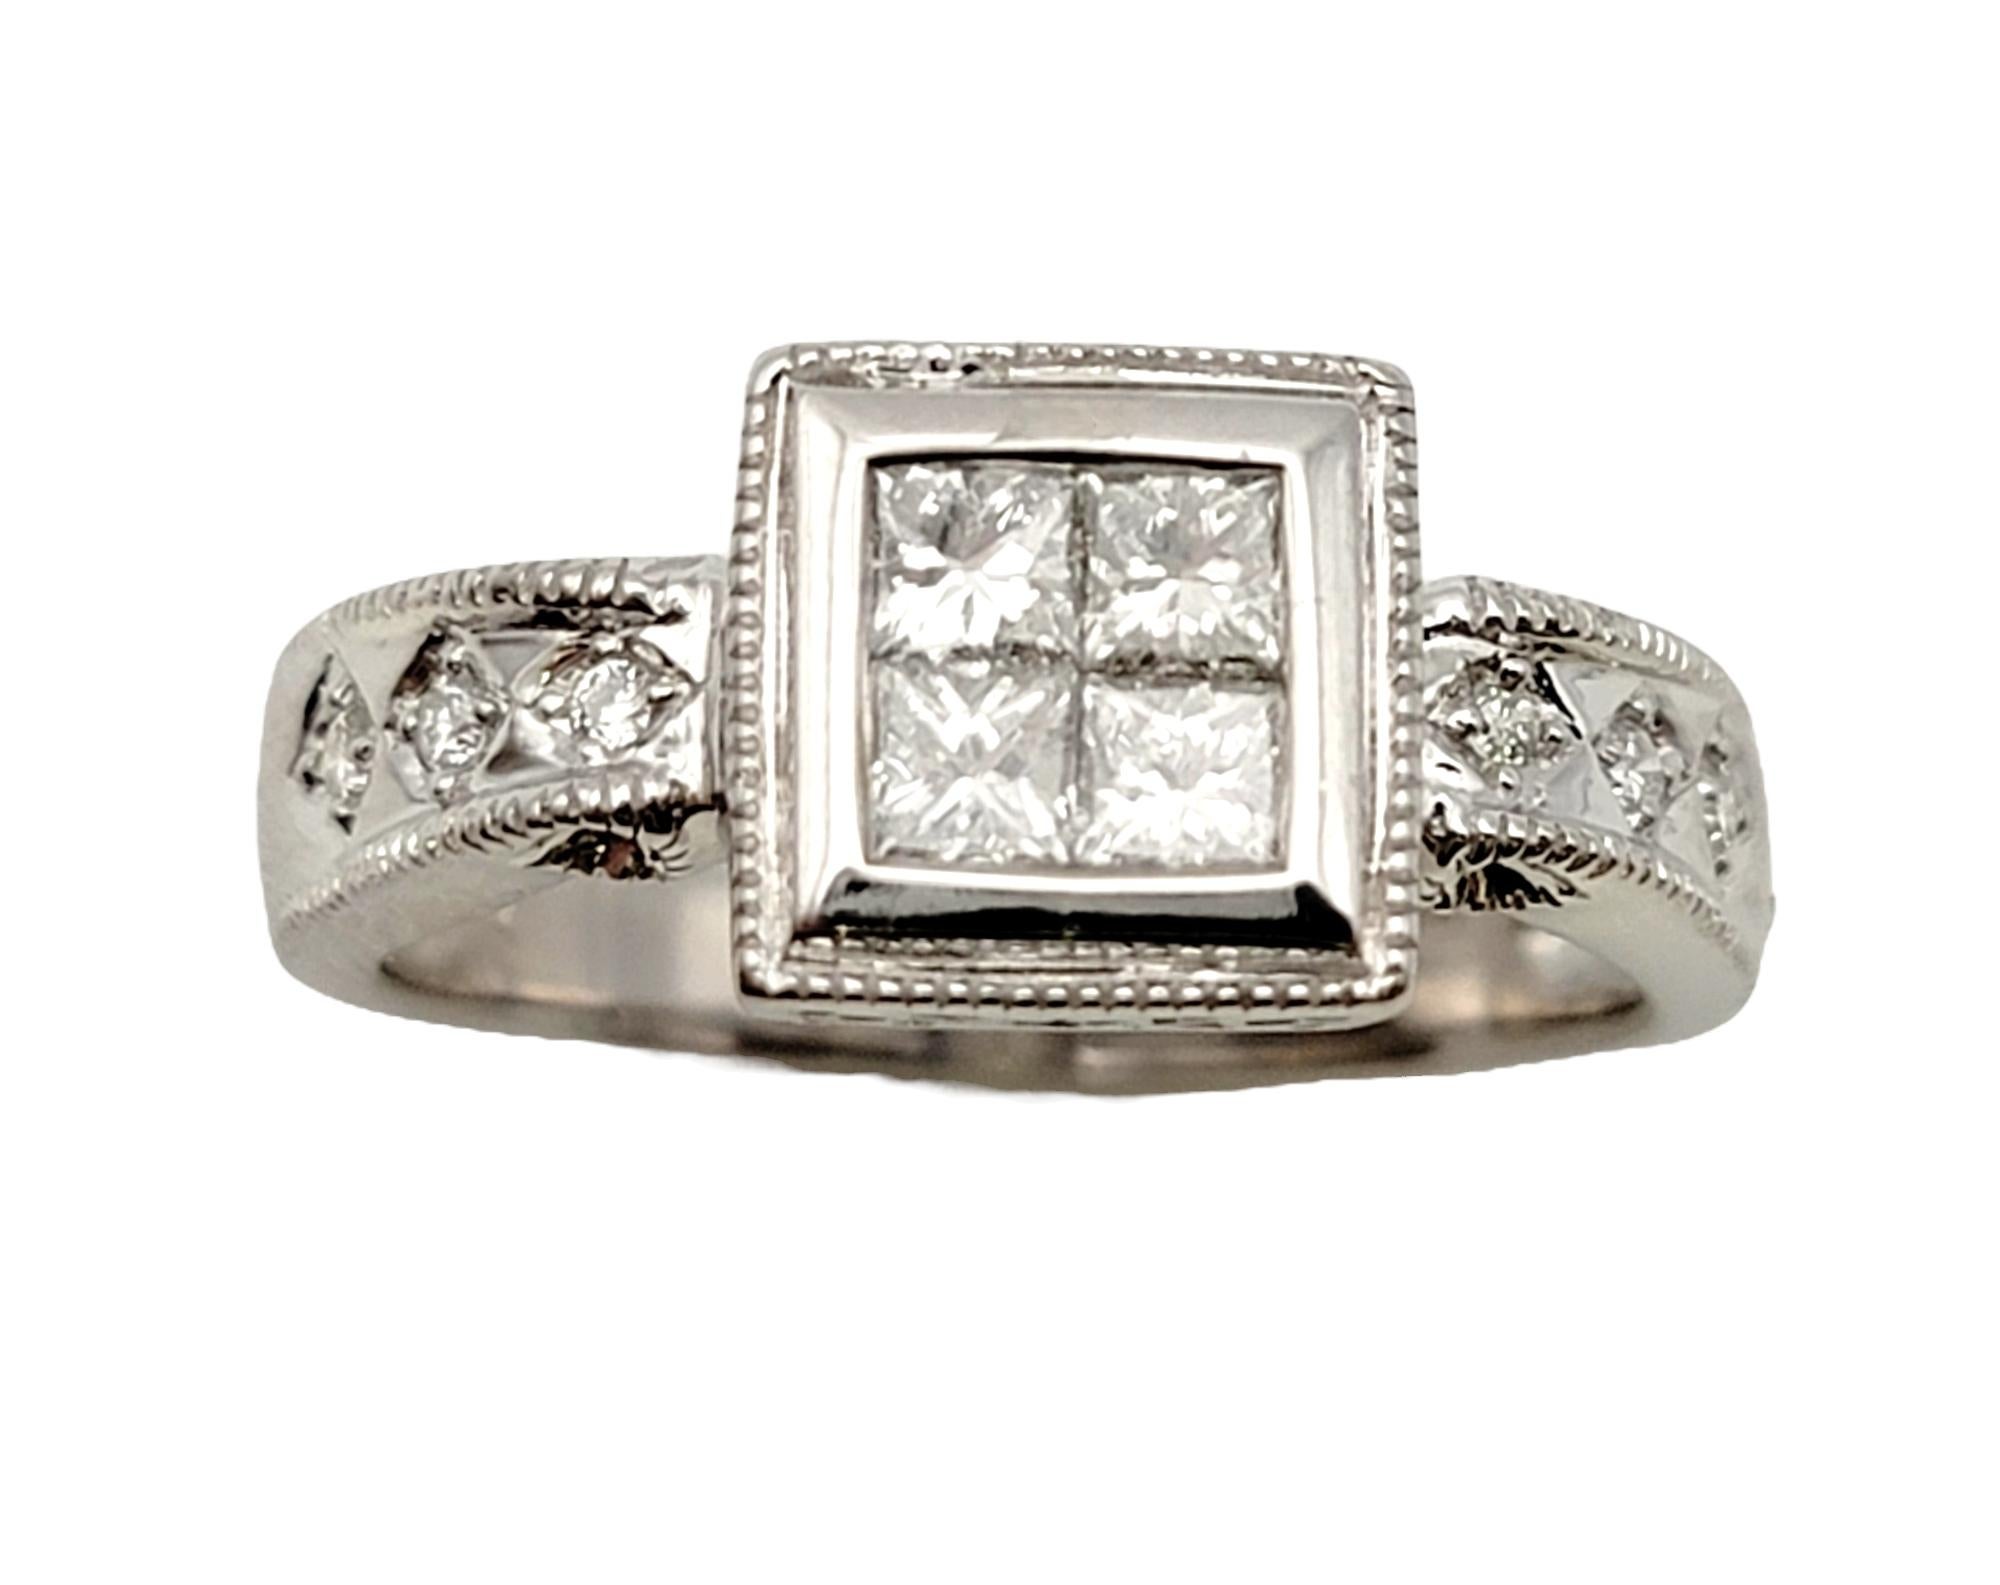 Ring size: 6.5

Lovely vintage style diamond ring with intricate milgrain detailing. 4 square princess cut diamonds are invisible set to create the illusion of a larger center stone, while additional round diamonds accent the shank and add extra